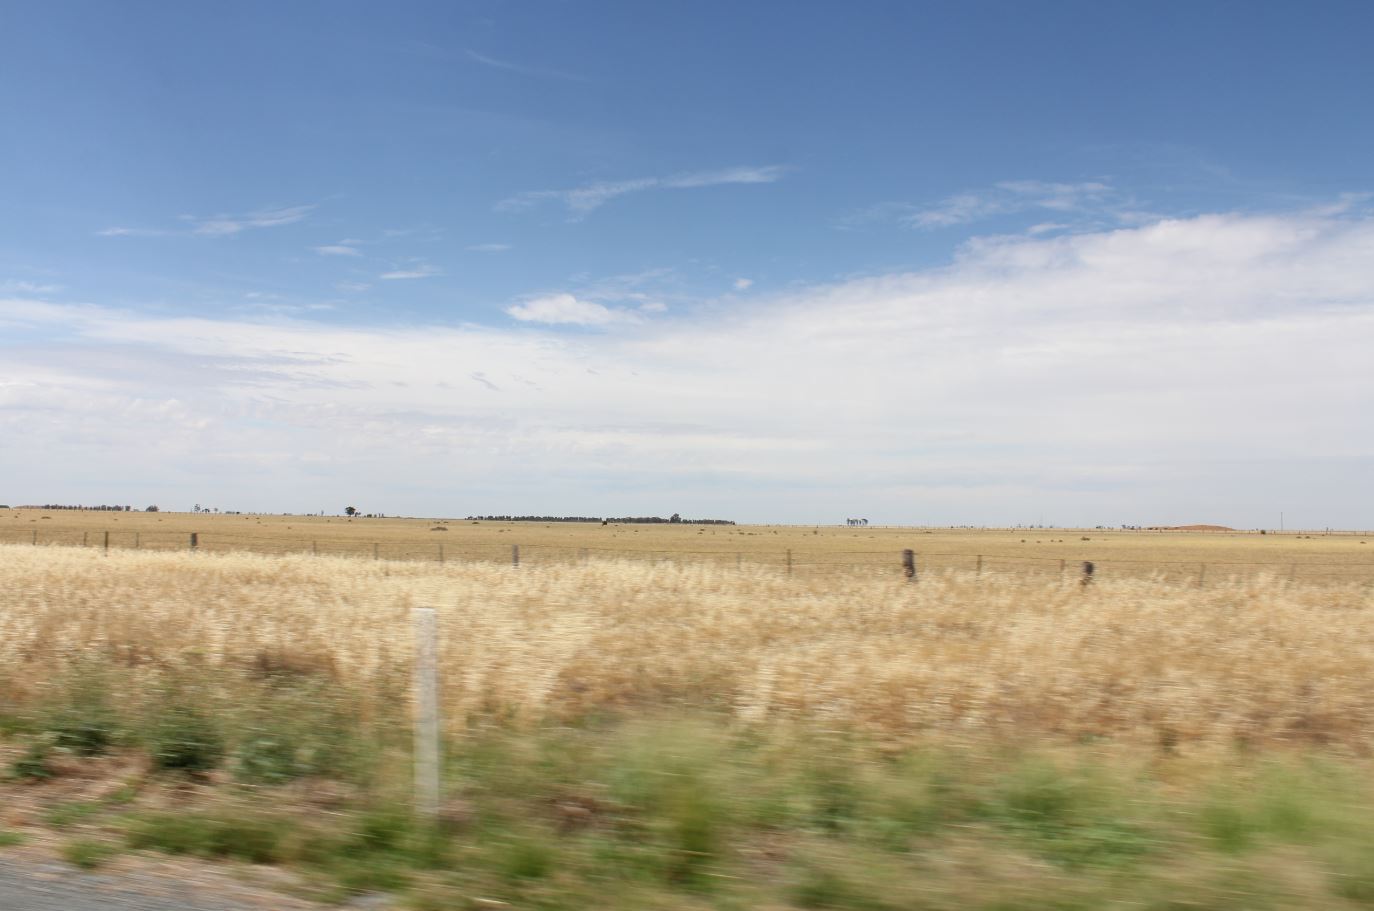 Terrain of the far north west of Victoria